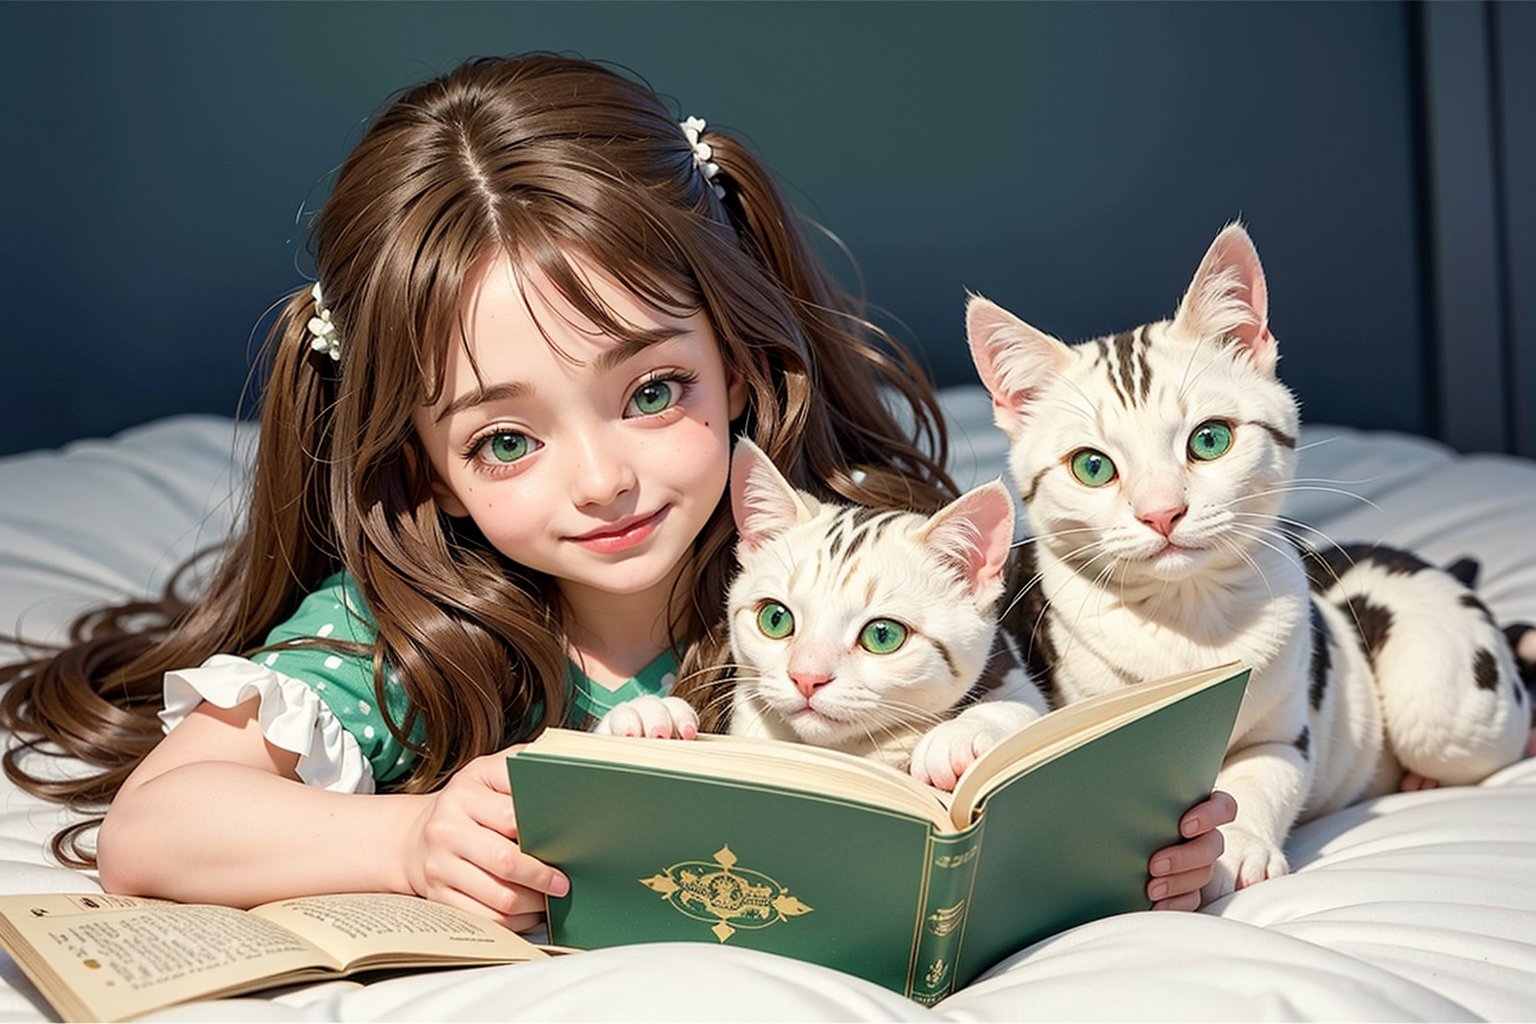 Rani, a bright-eyed 7-year-old with flowing brown hair and emerald green eyes, Mittens, a spunky white cat with black spots

Before bedtime, Rani read her favorite storybook. Slowly, Rani drifted off to sleep with a smile on her face, dreaming of new adventures waiting for her tomorrow. Night 